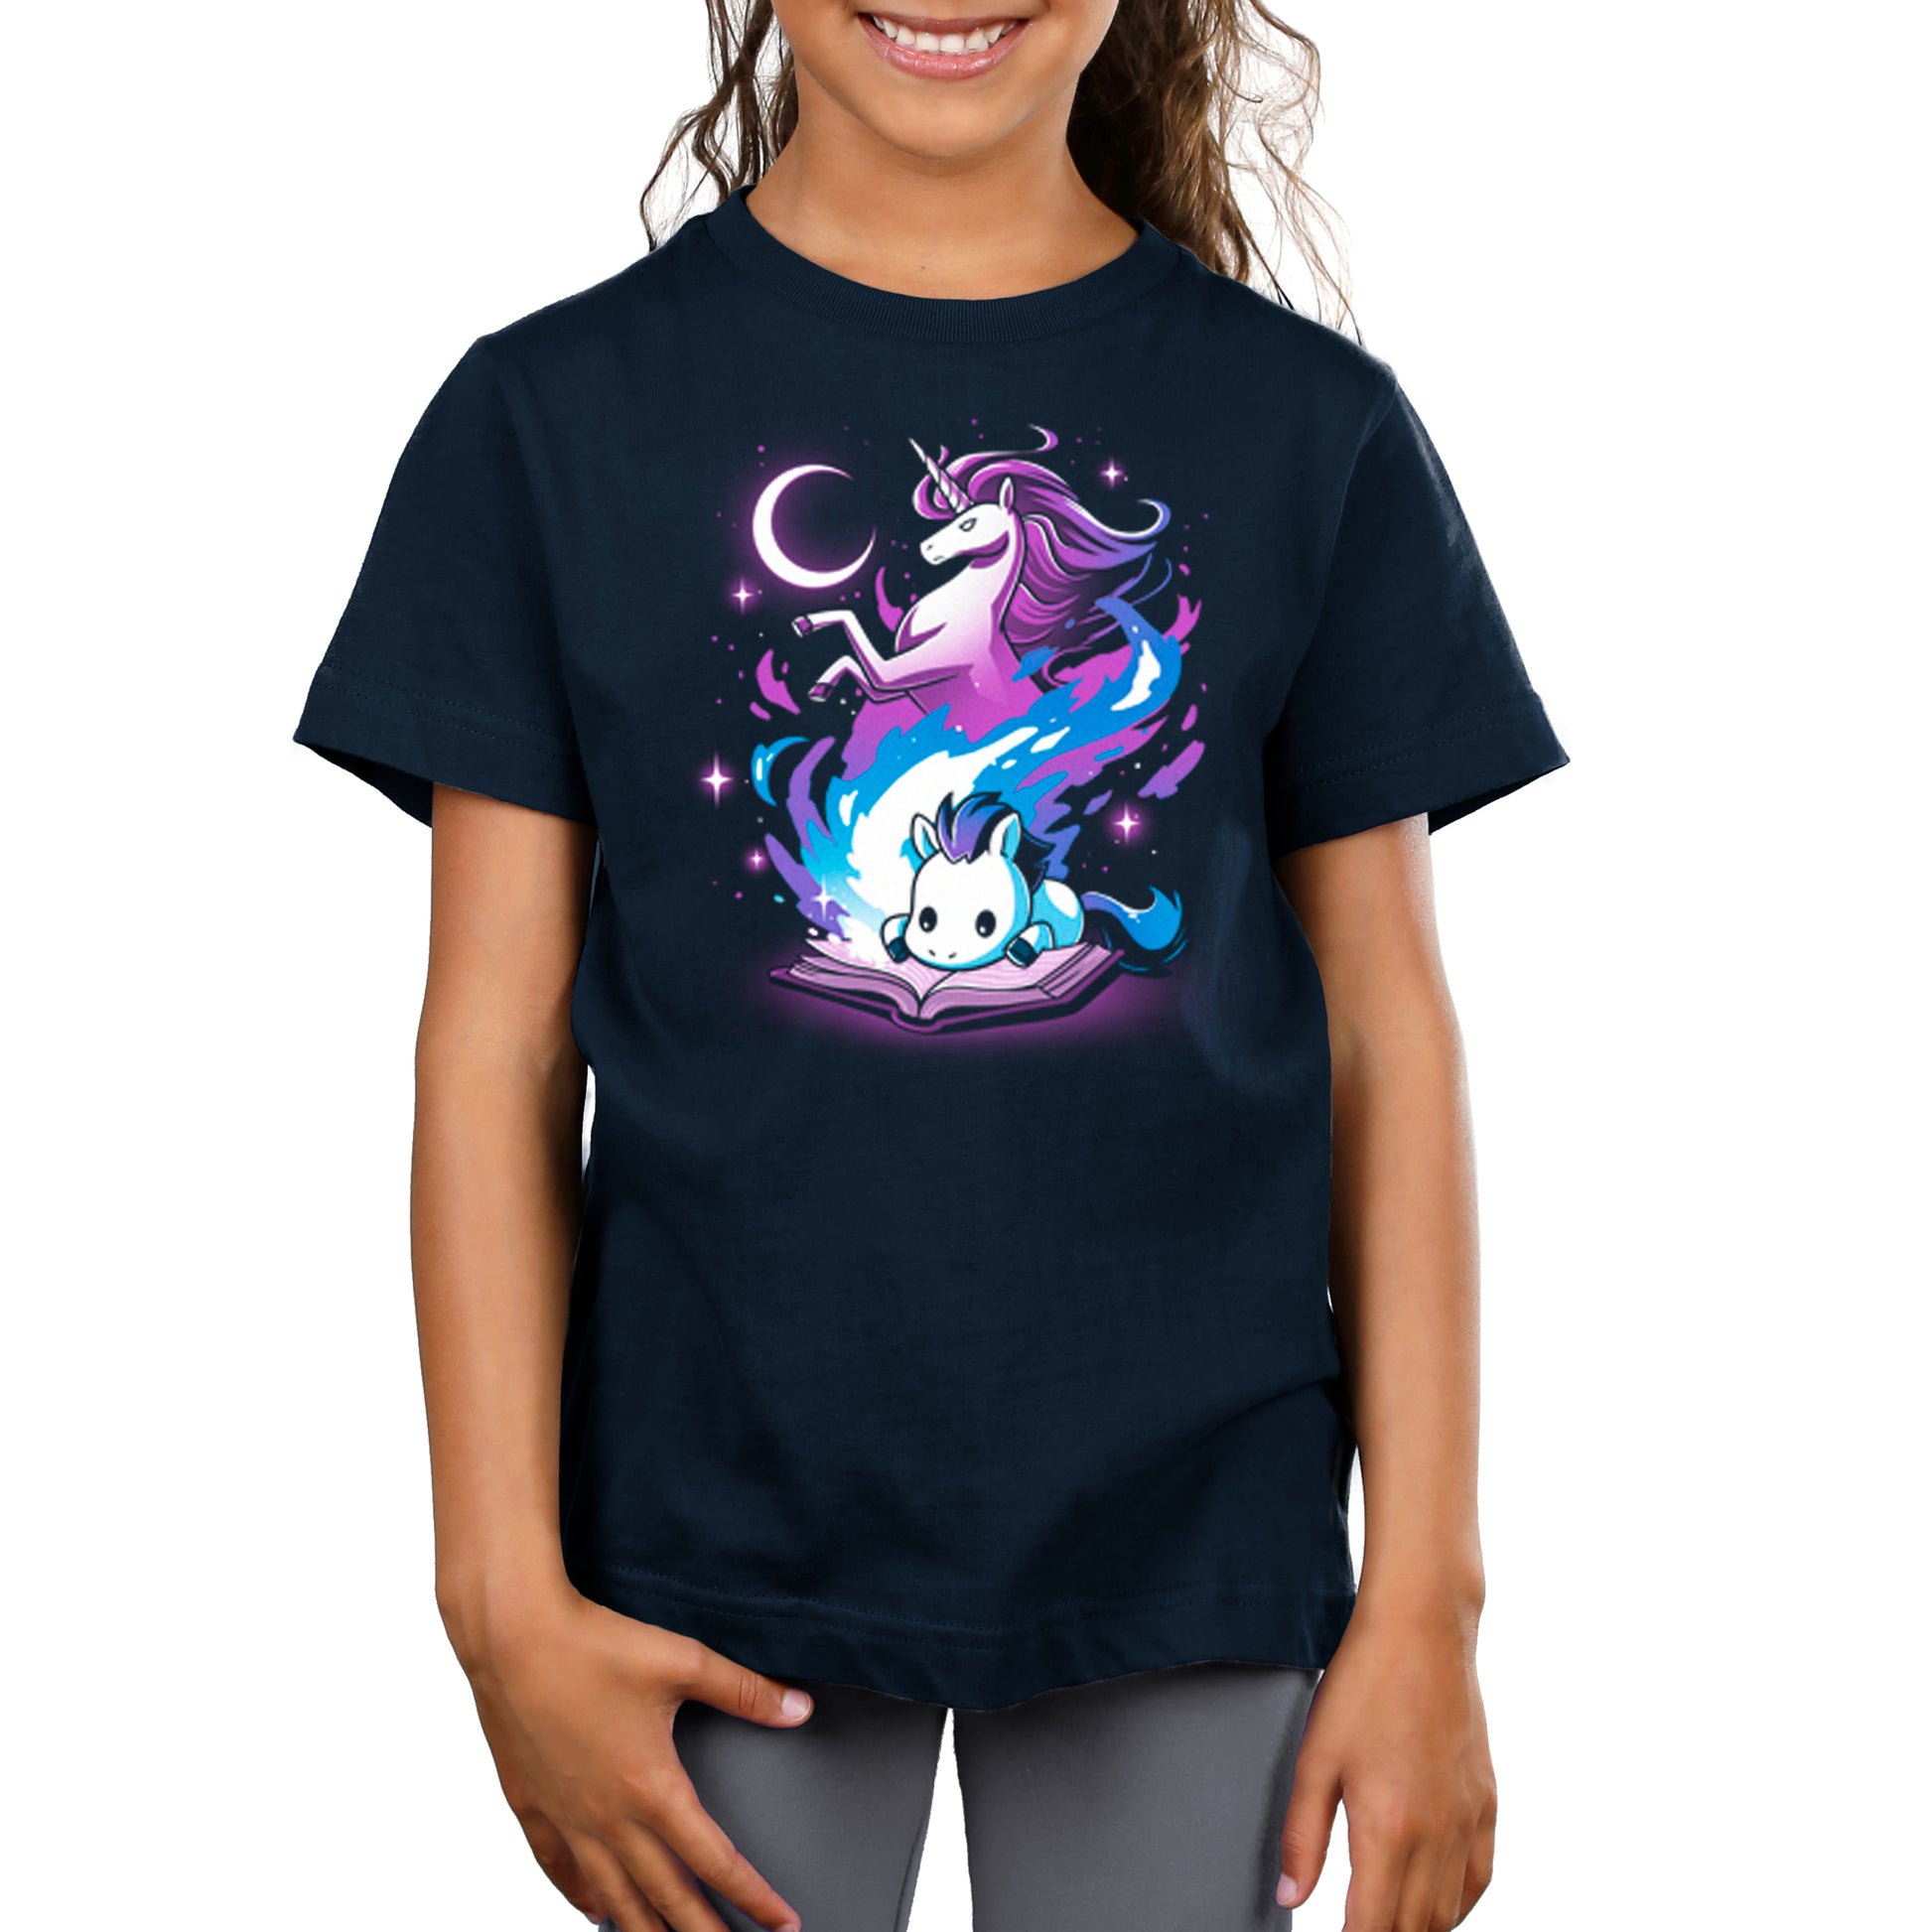 A girl wearing a TeeTurtle A Magical Tale t-shirt with a unicorn on it.